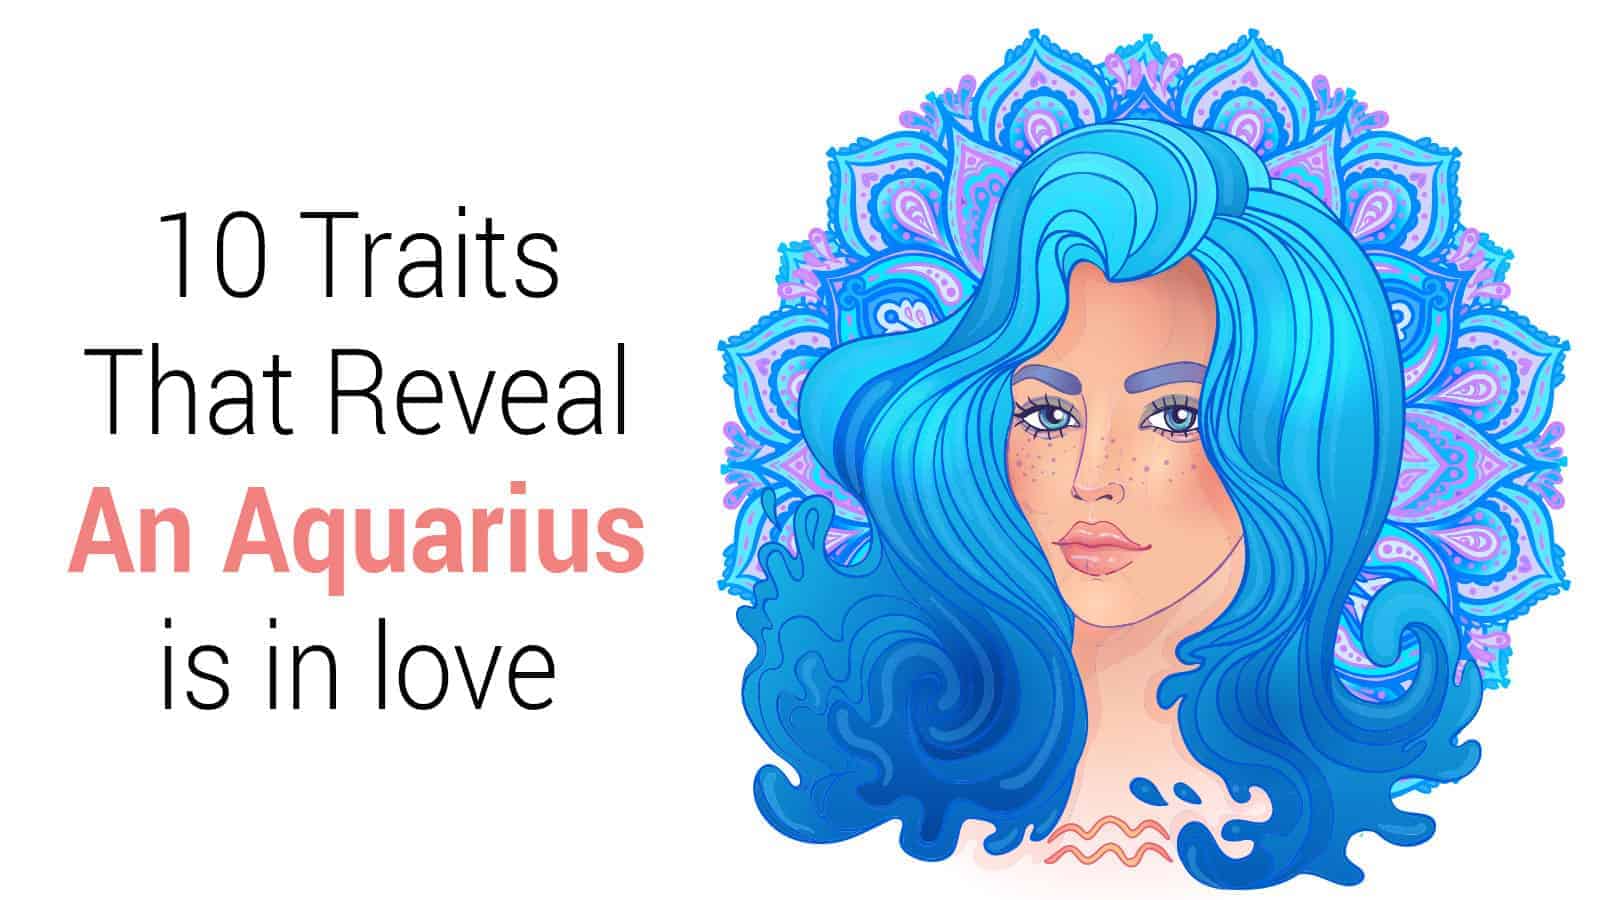 10 Traits That Reveal an Aquarius is in Love